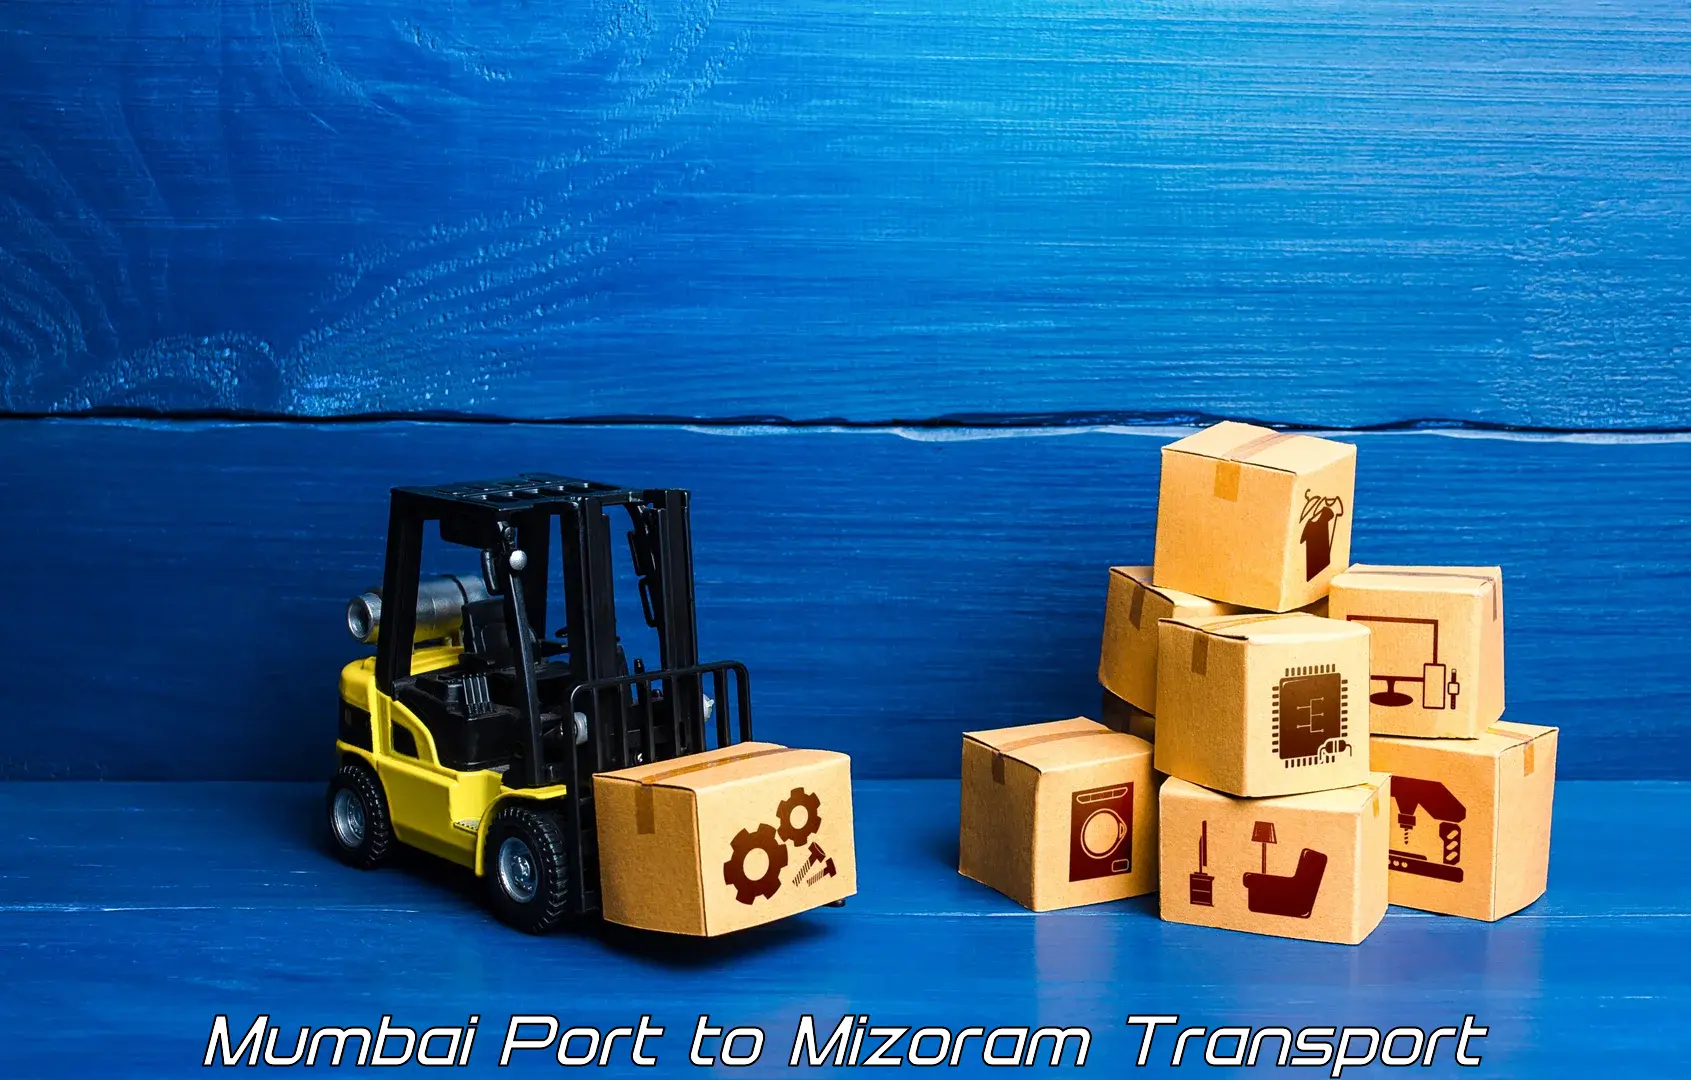 Daily parcel service transport Mumbai Port to Darlawn